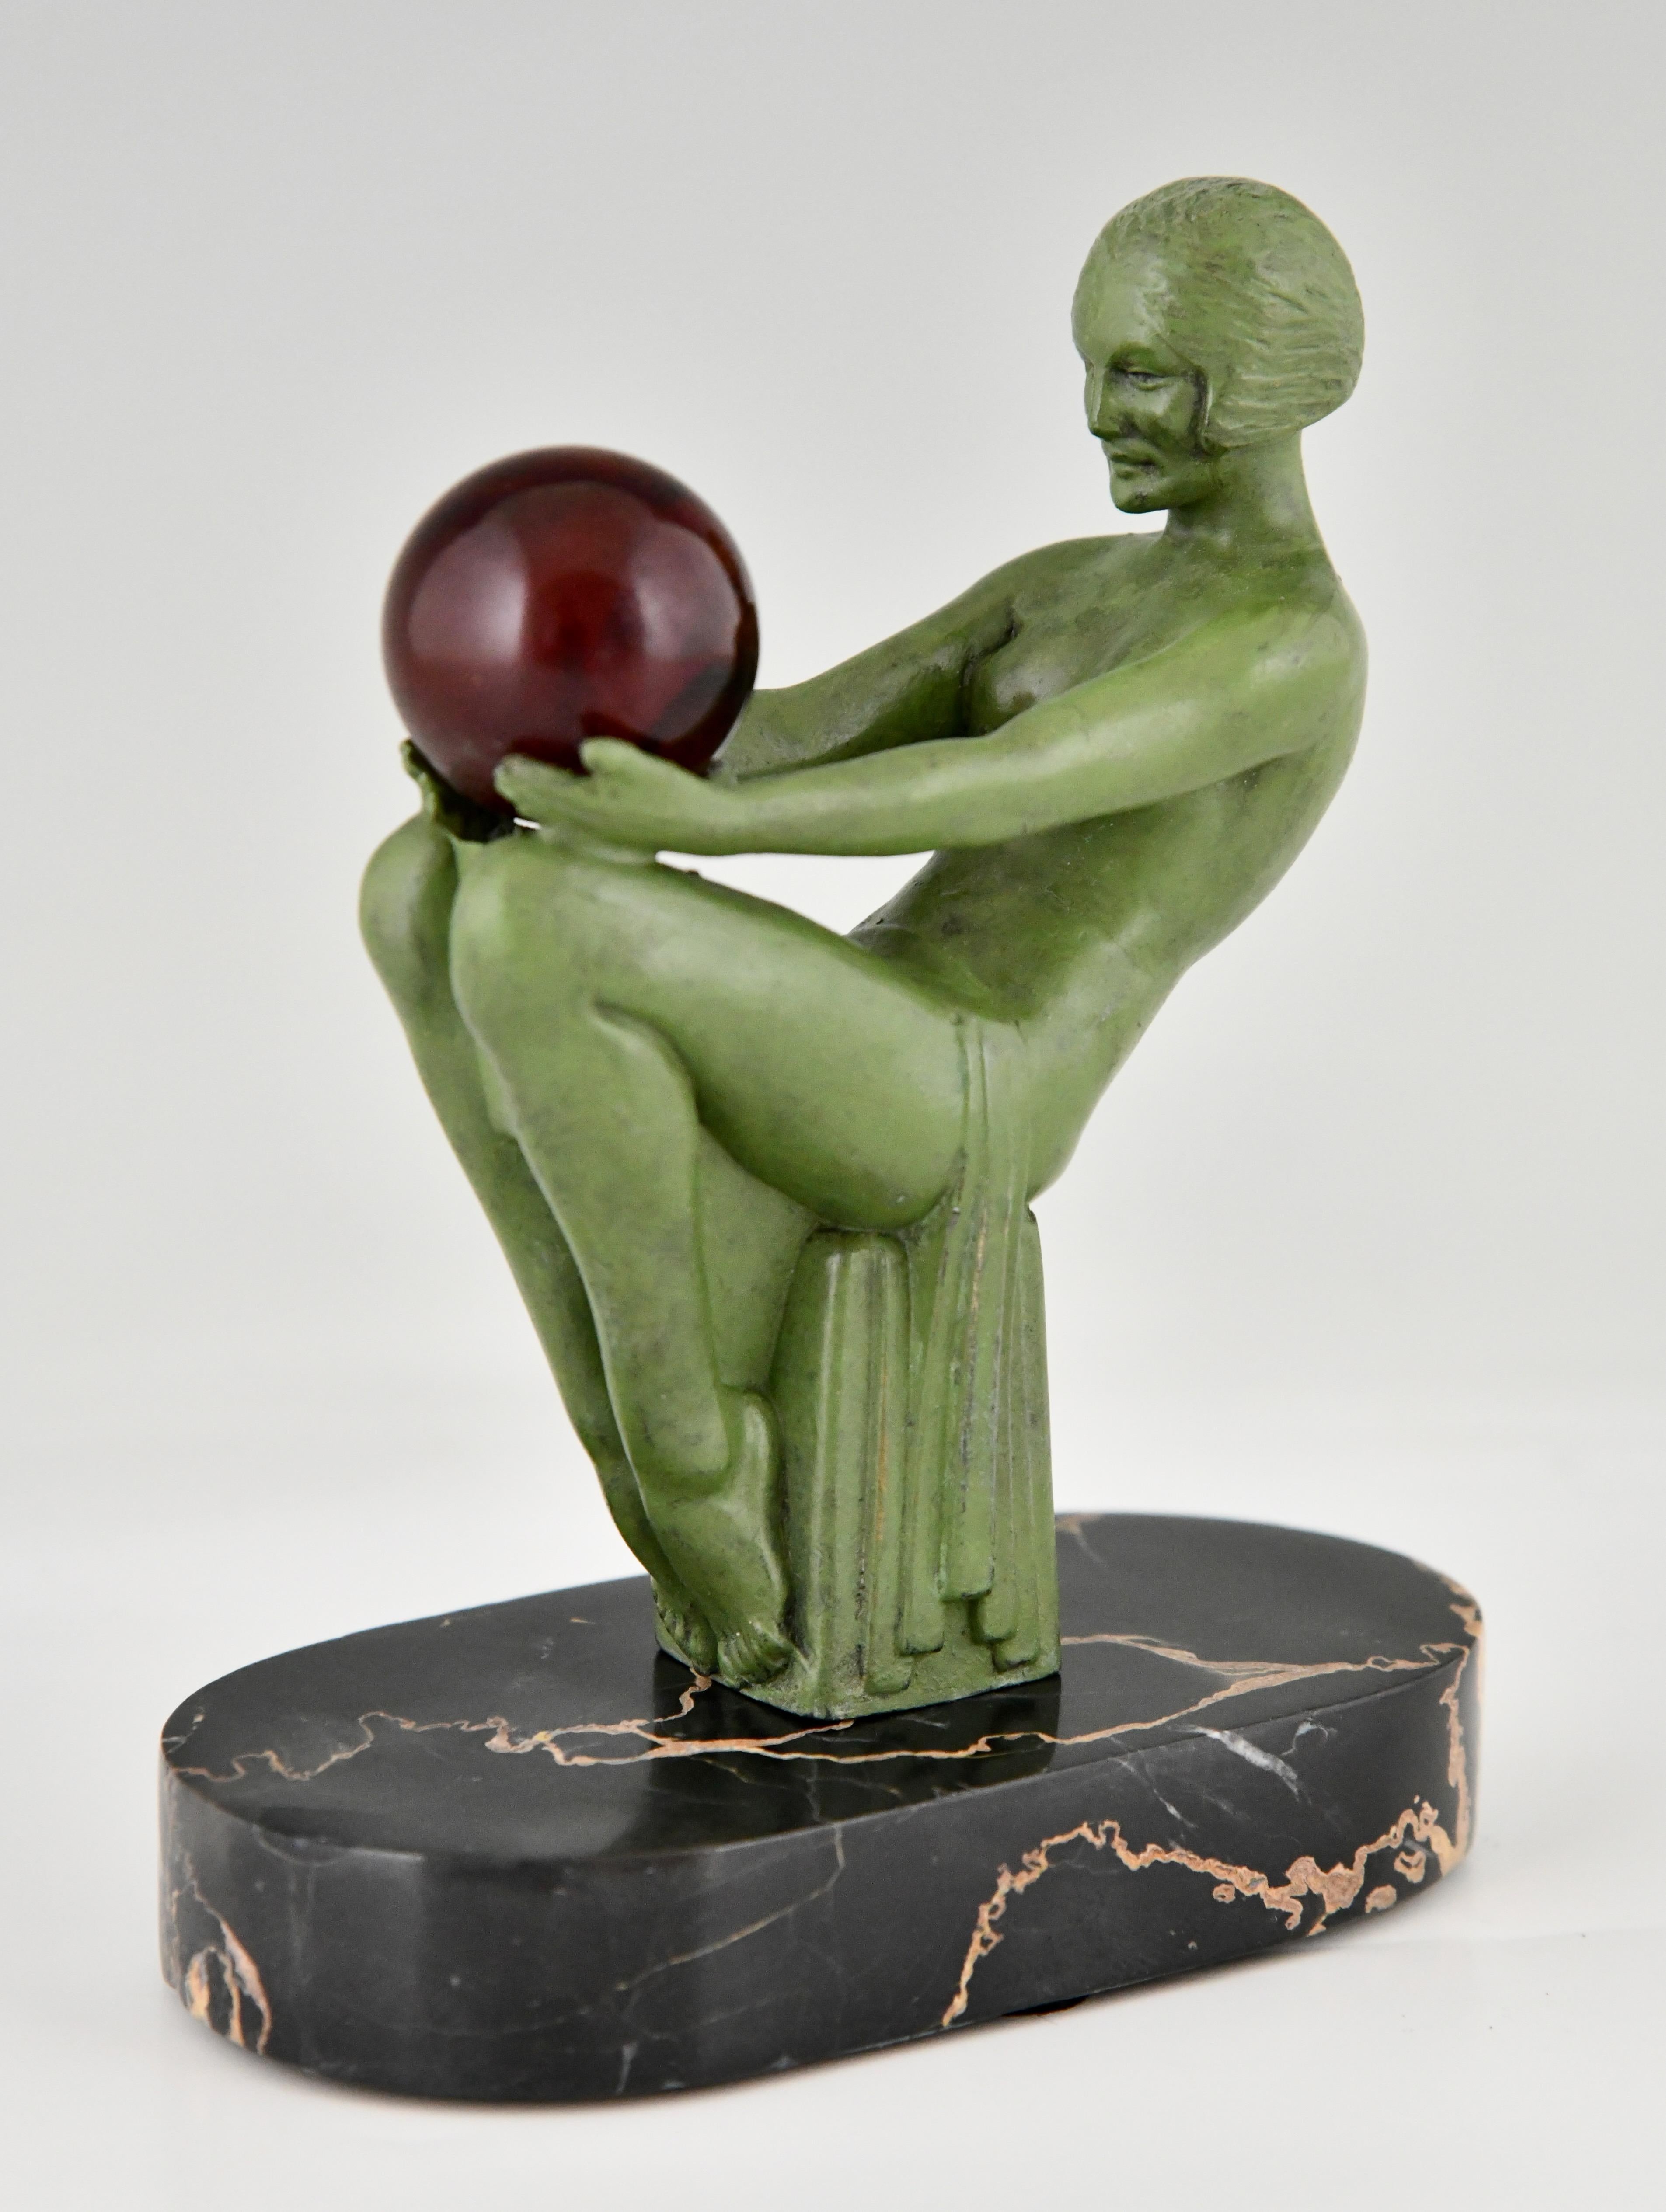 French Art Deco sculpture seated nude with ball signed by Max Le Verrier France 1930